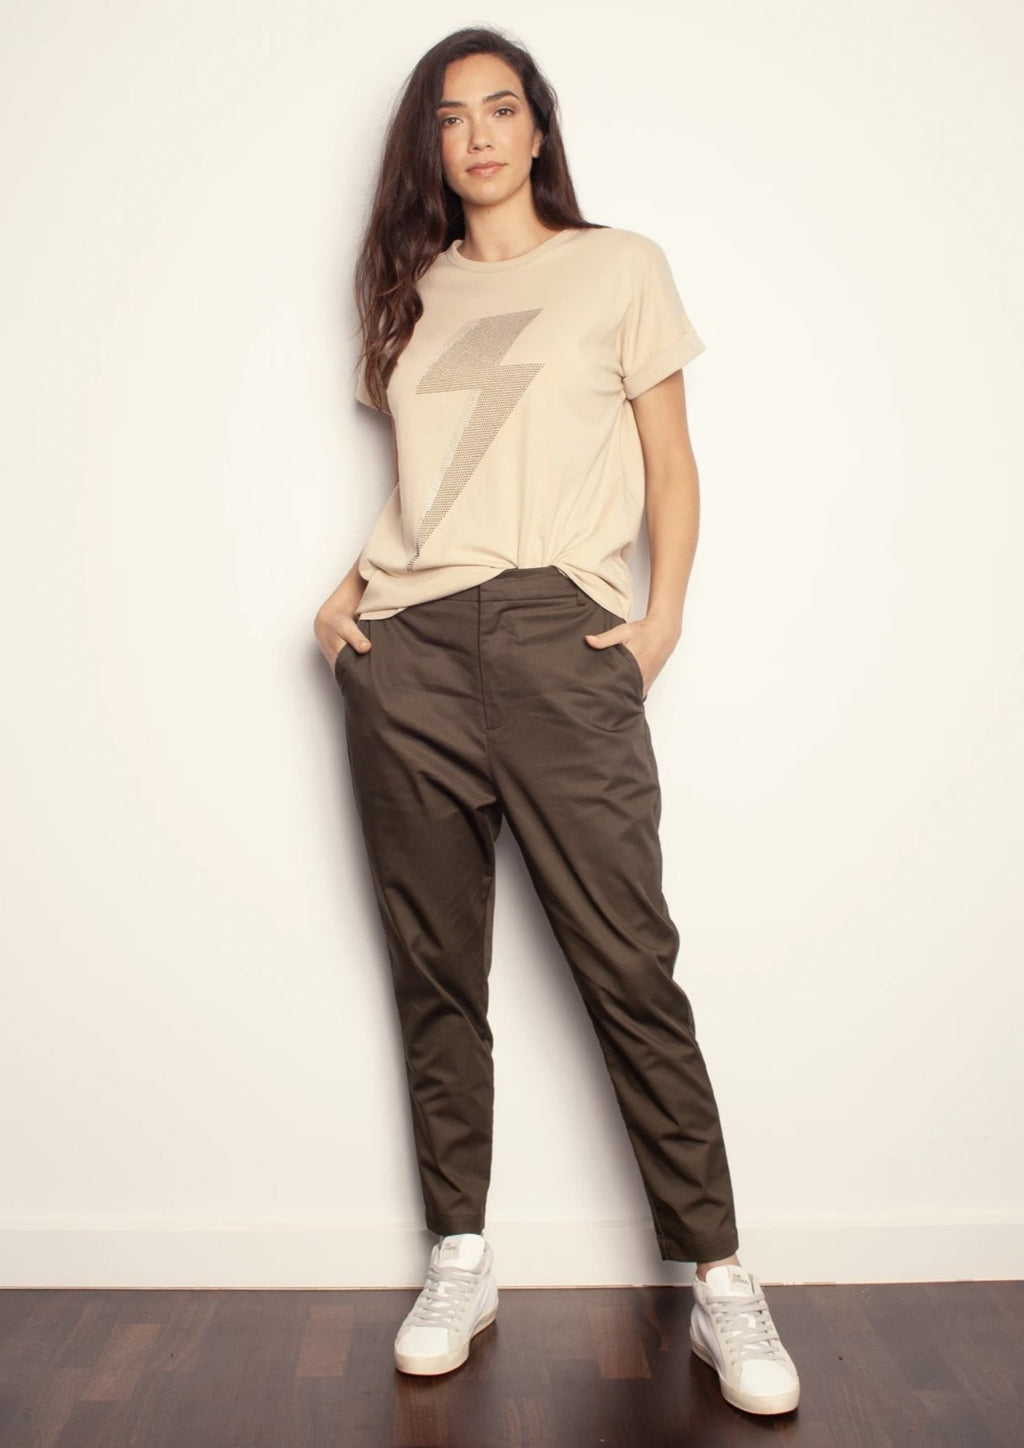 The Relaxed Pant - Dark Olive, by The Others  This relaxed pant in a Dark Olive colour has a soft hand feel made from cotton blend woven fabric.  The pant comes in a regular fit, with tapered leg, fixed zip fly front with elastic back waistband and side seam pockets.  Style with your fave neutral tee, or our gorgeous Slouchy Sweat with Zebra Lips to glam them up a little